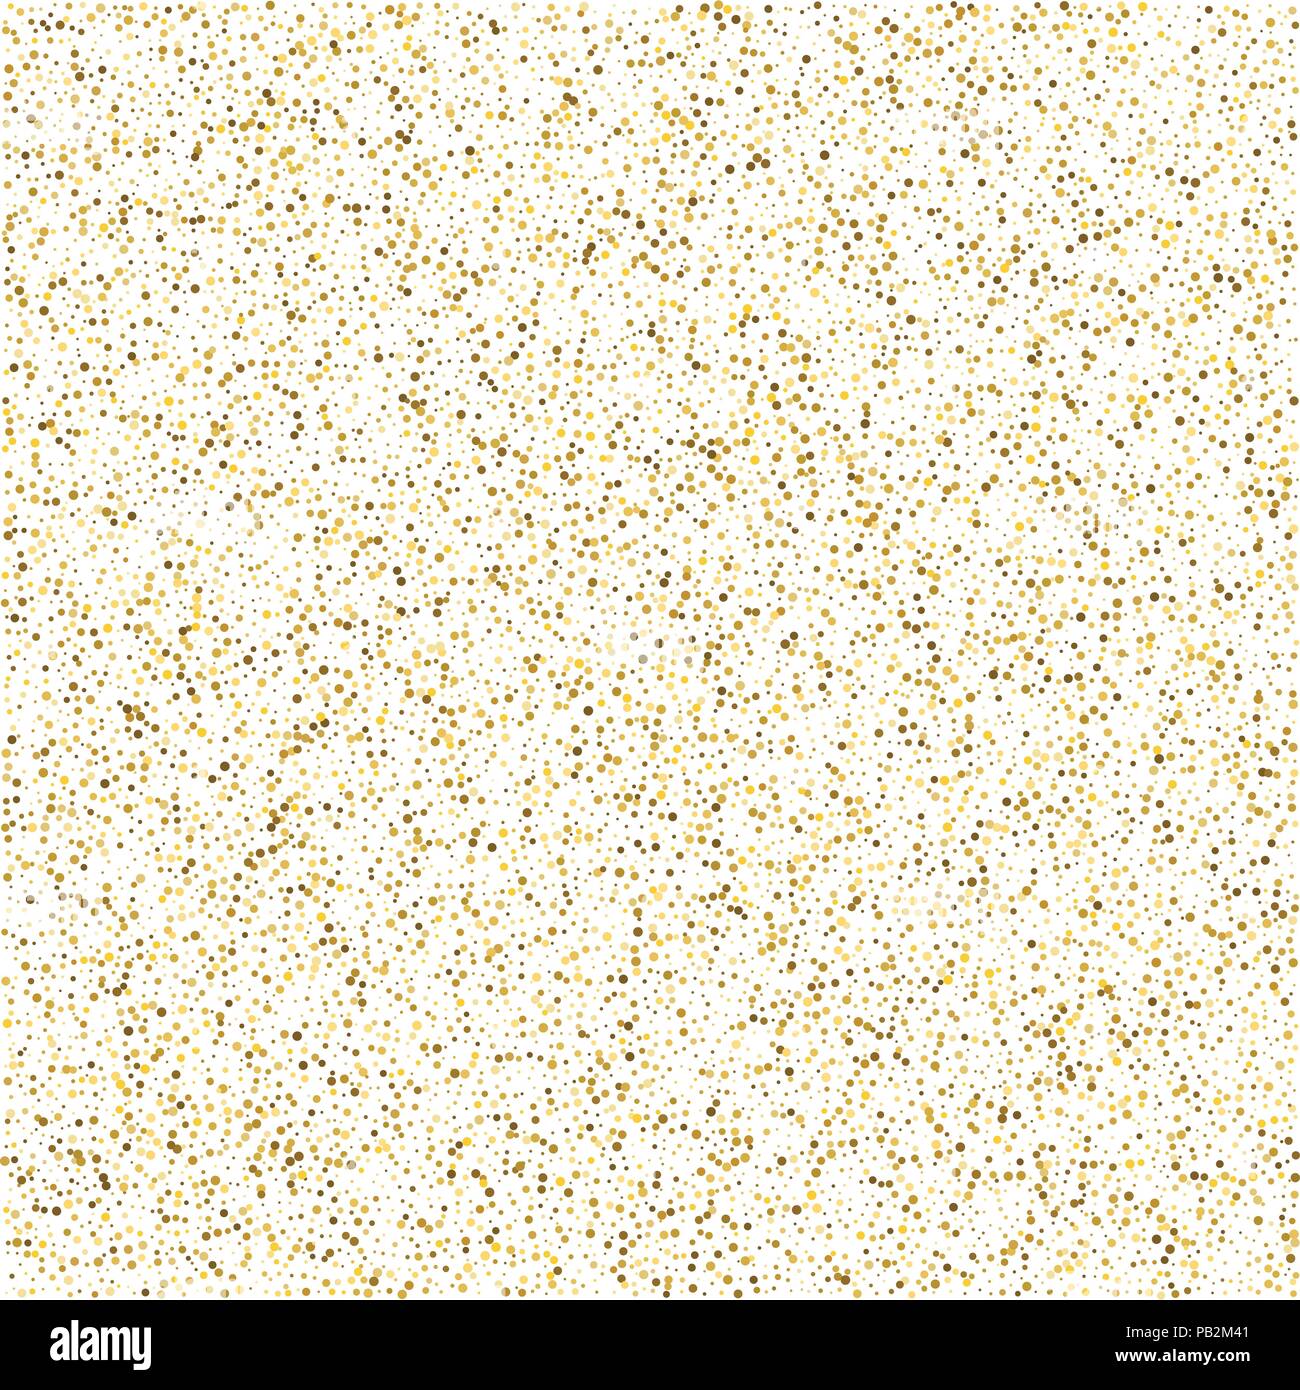 Vector glitter background. Cute small falling golden dots. Sparkle ...